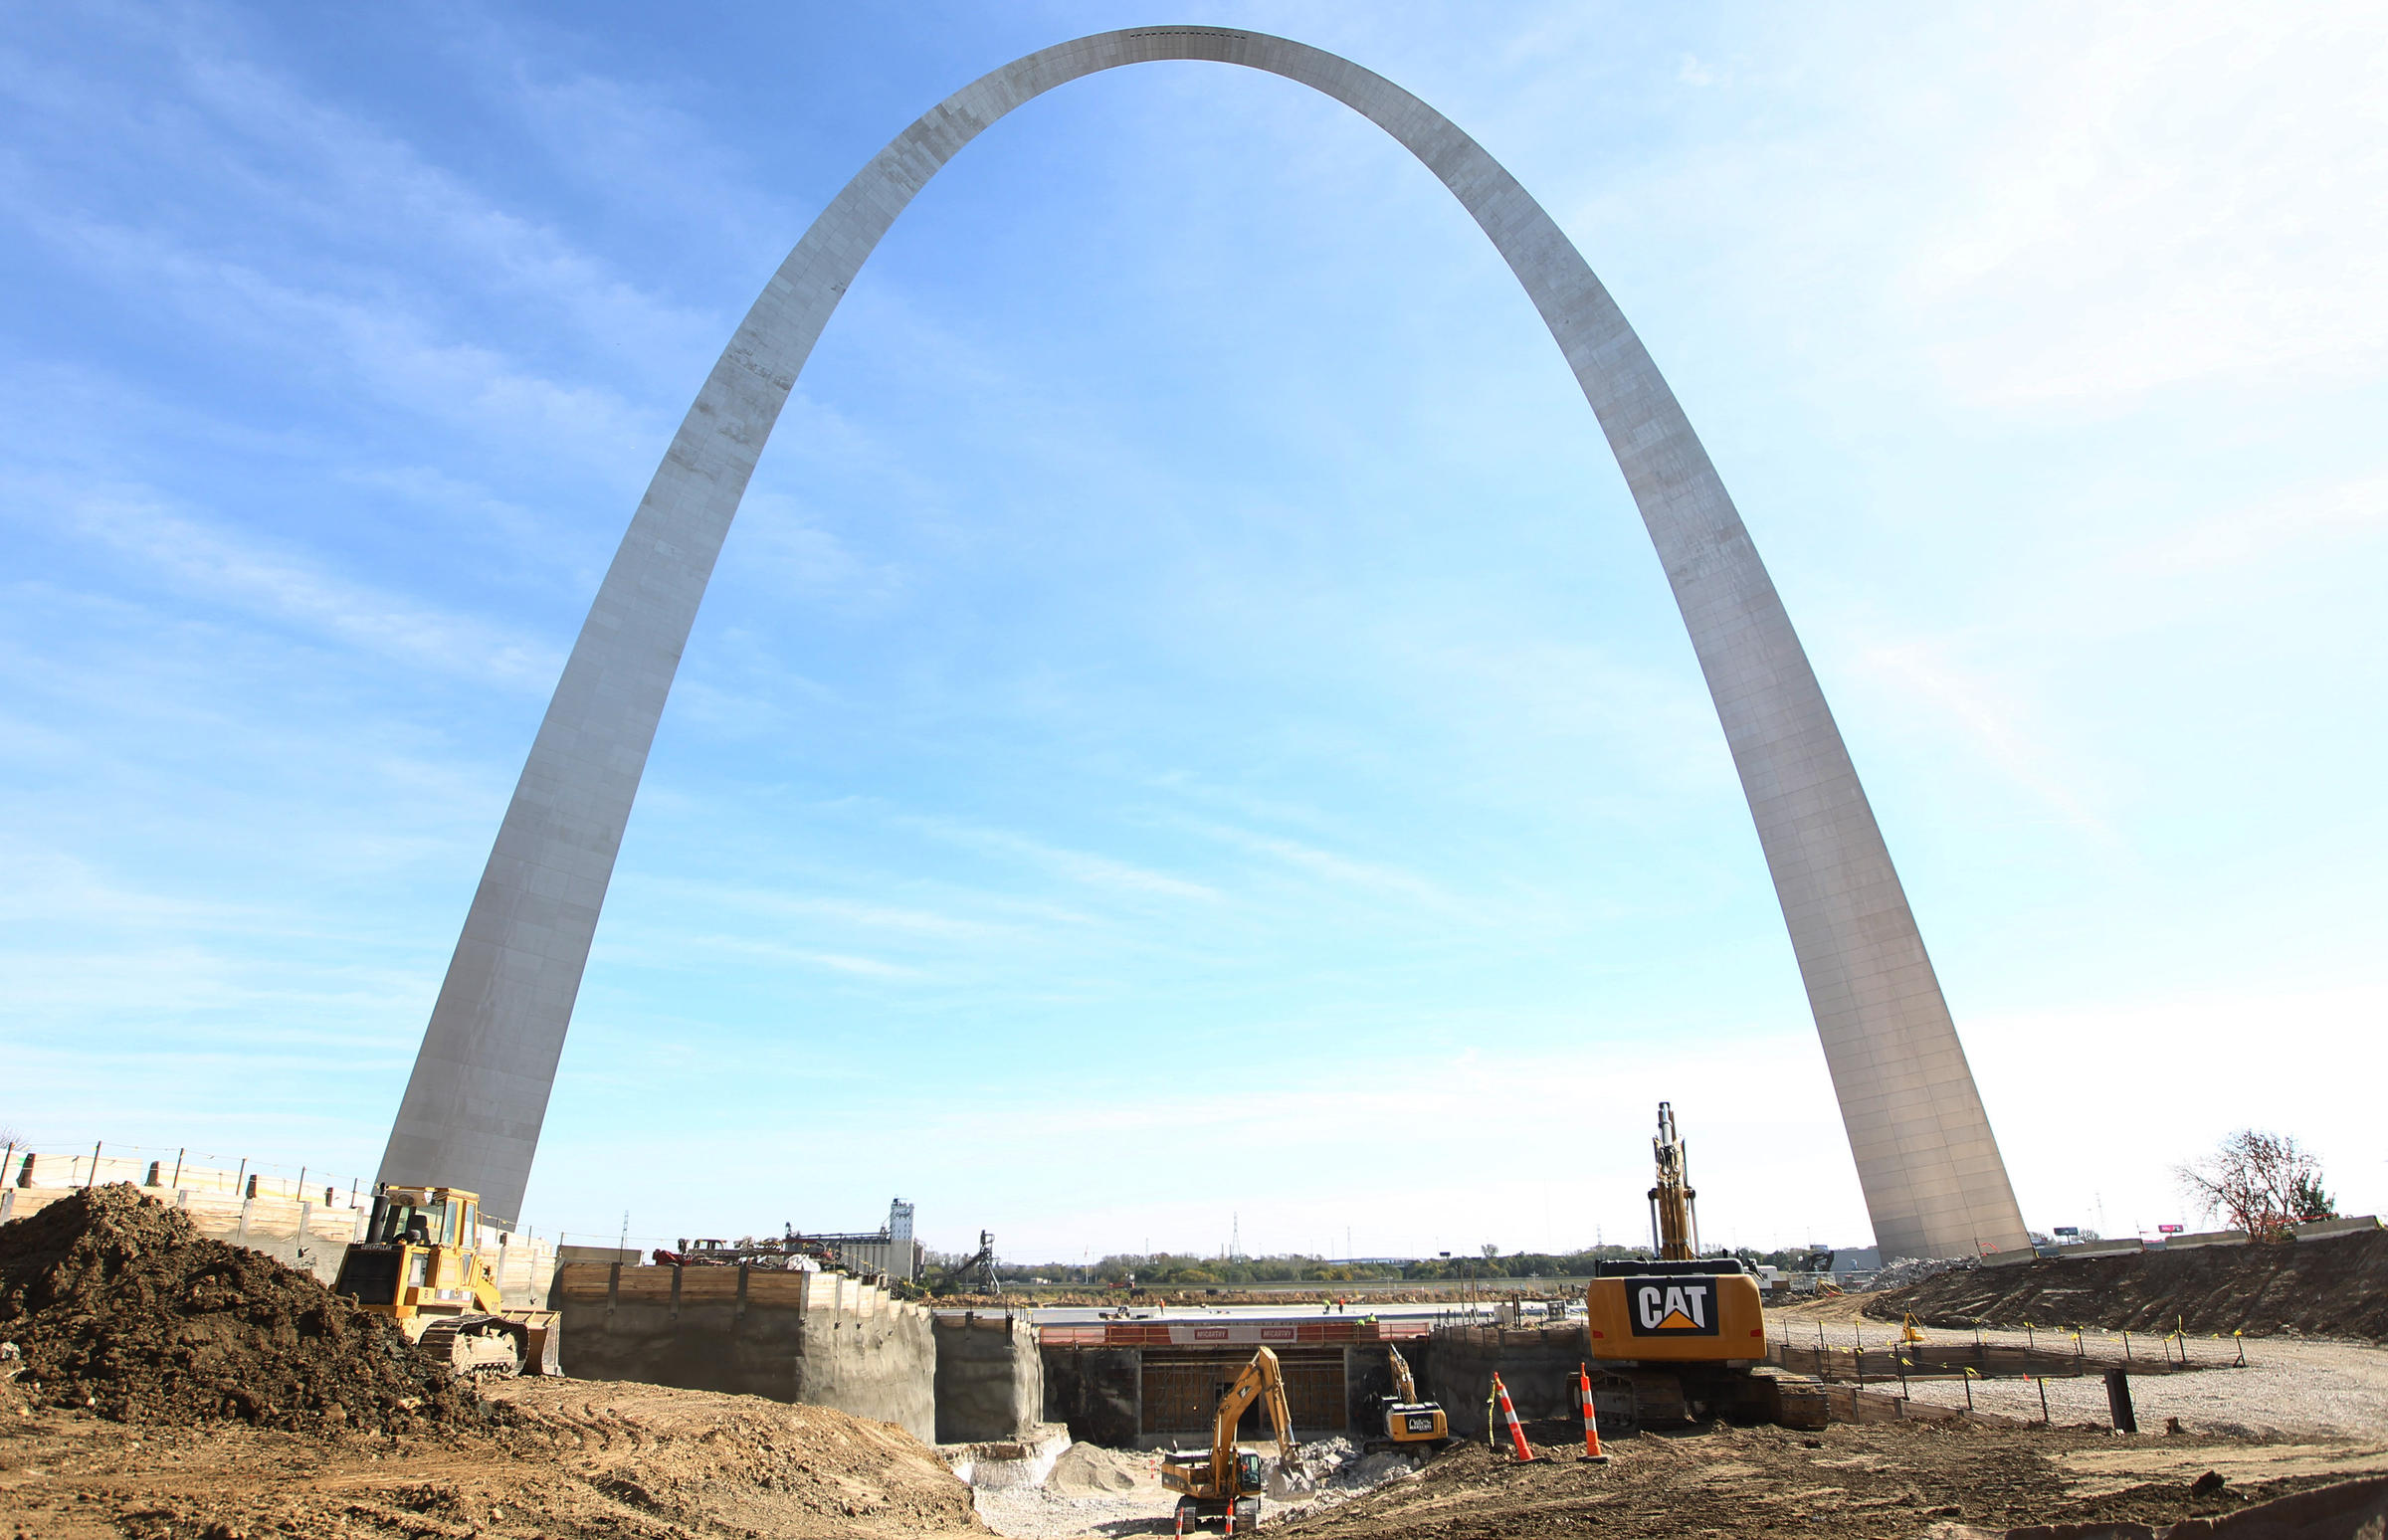 As Gateway Arch Turns 50, Its Message Gets Reframed | St. Louis Public Radio